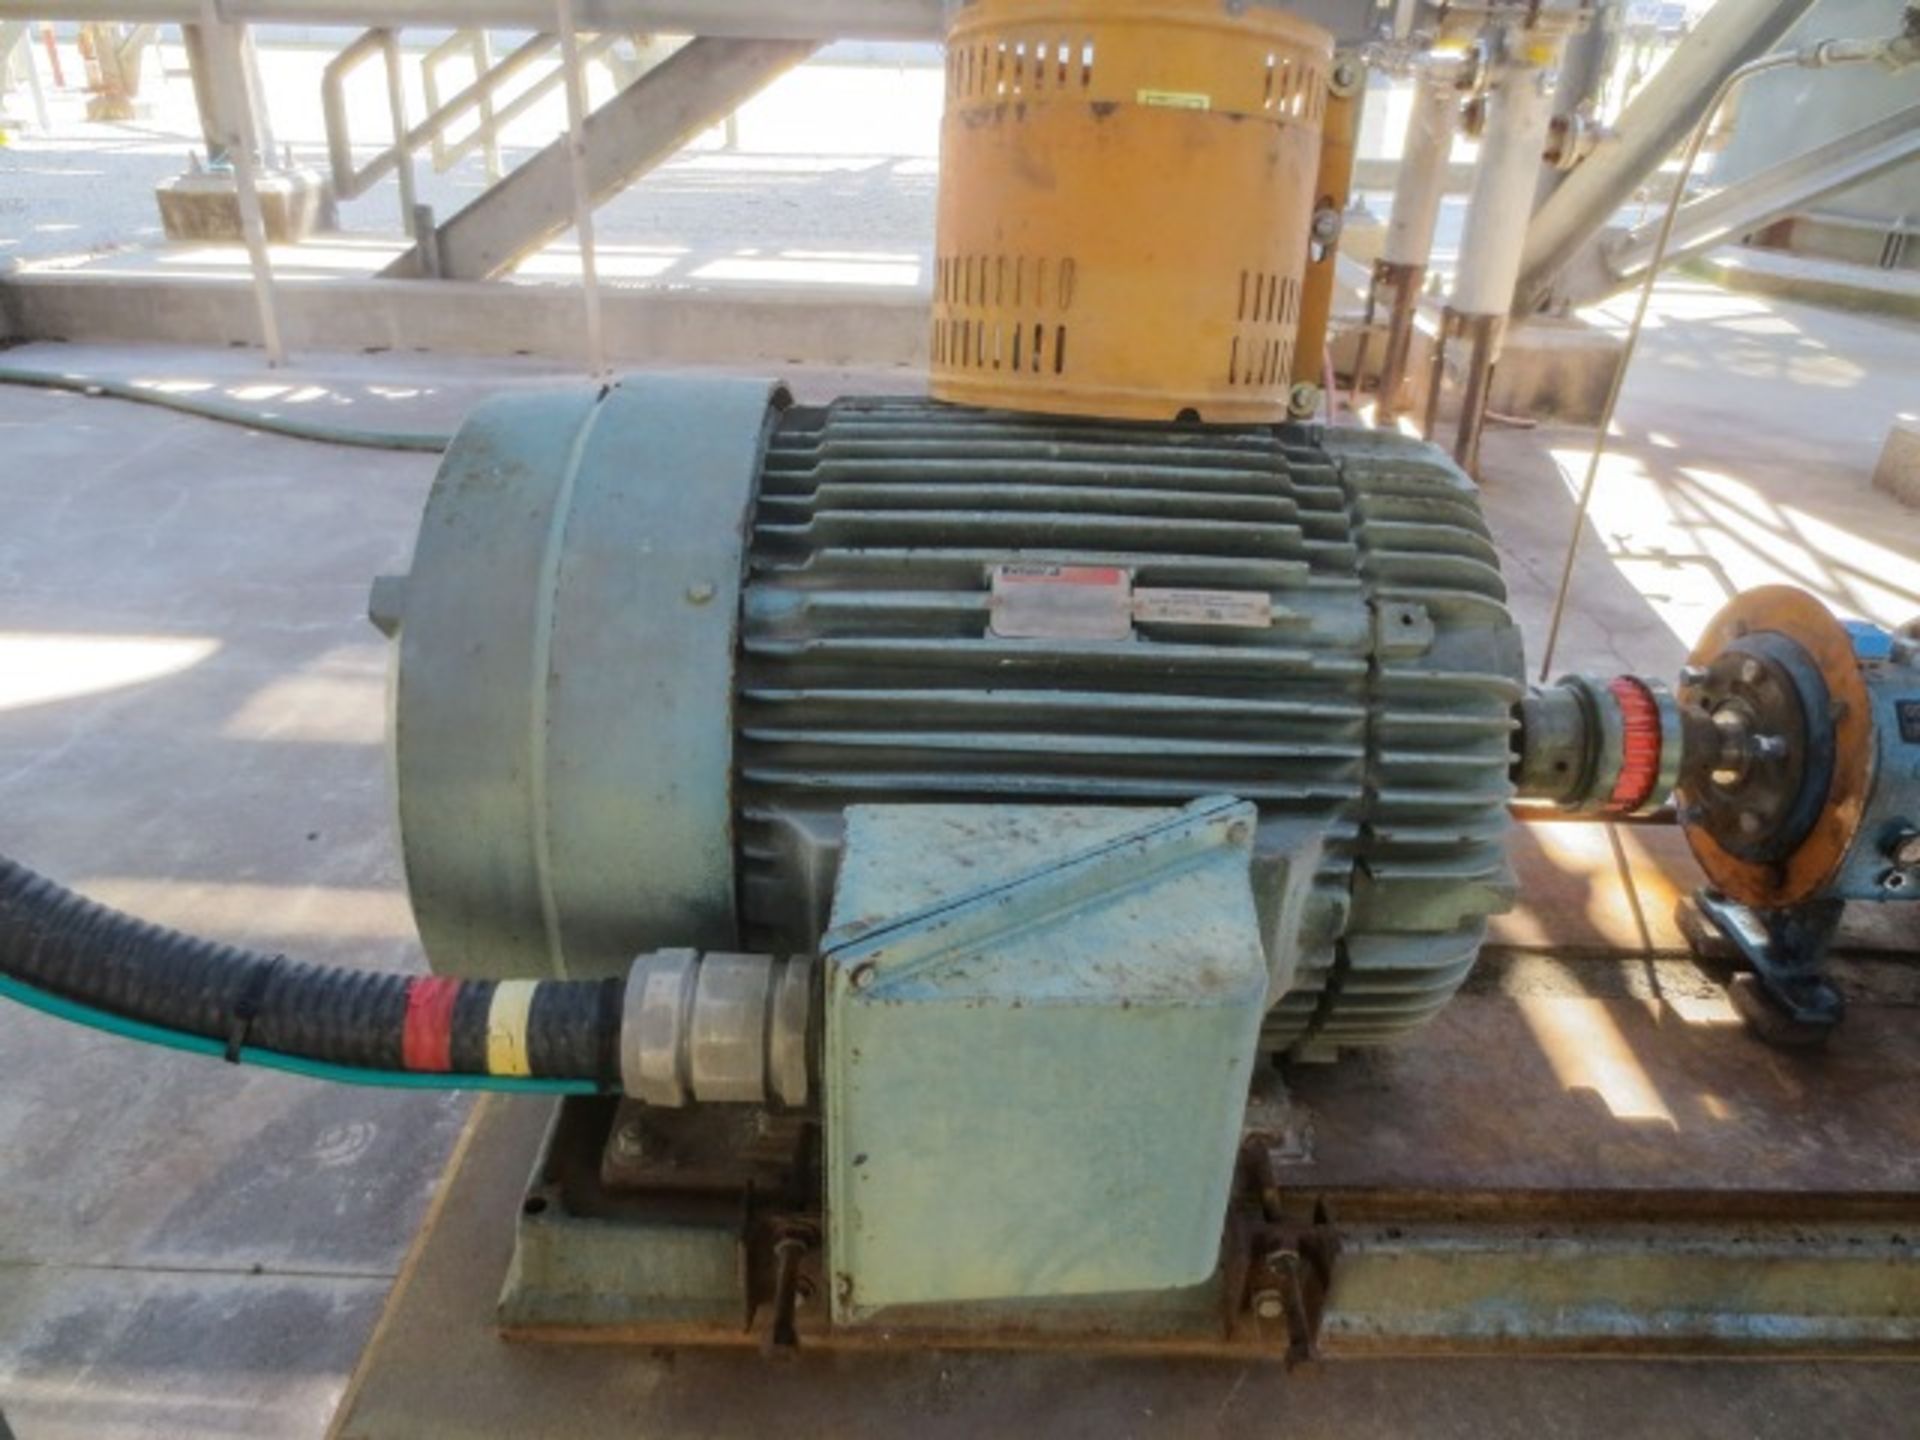 Goulds centrifugal pump, model 3196 LTX. Stainless steel 316. Size 4X6- Rigging/Loading Fee: $850 - Image 4 of 9